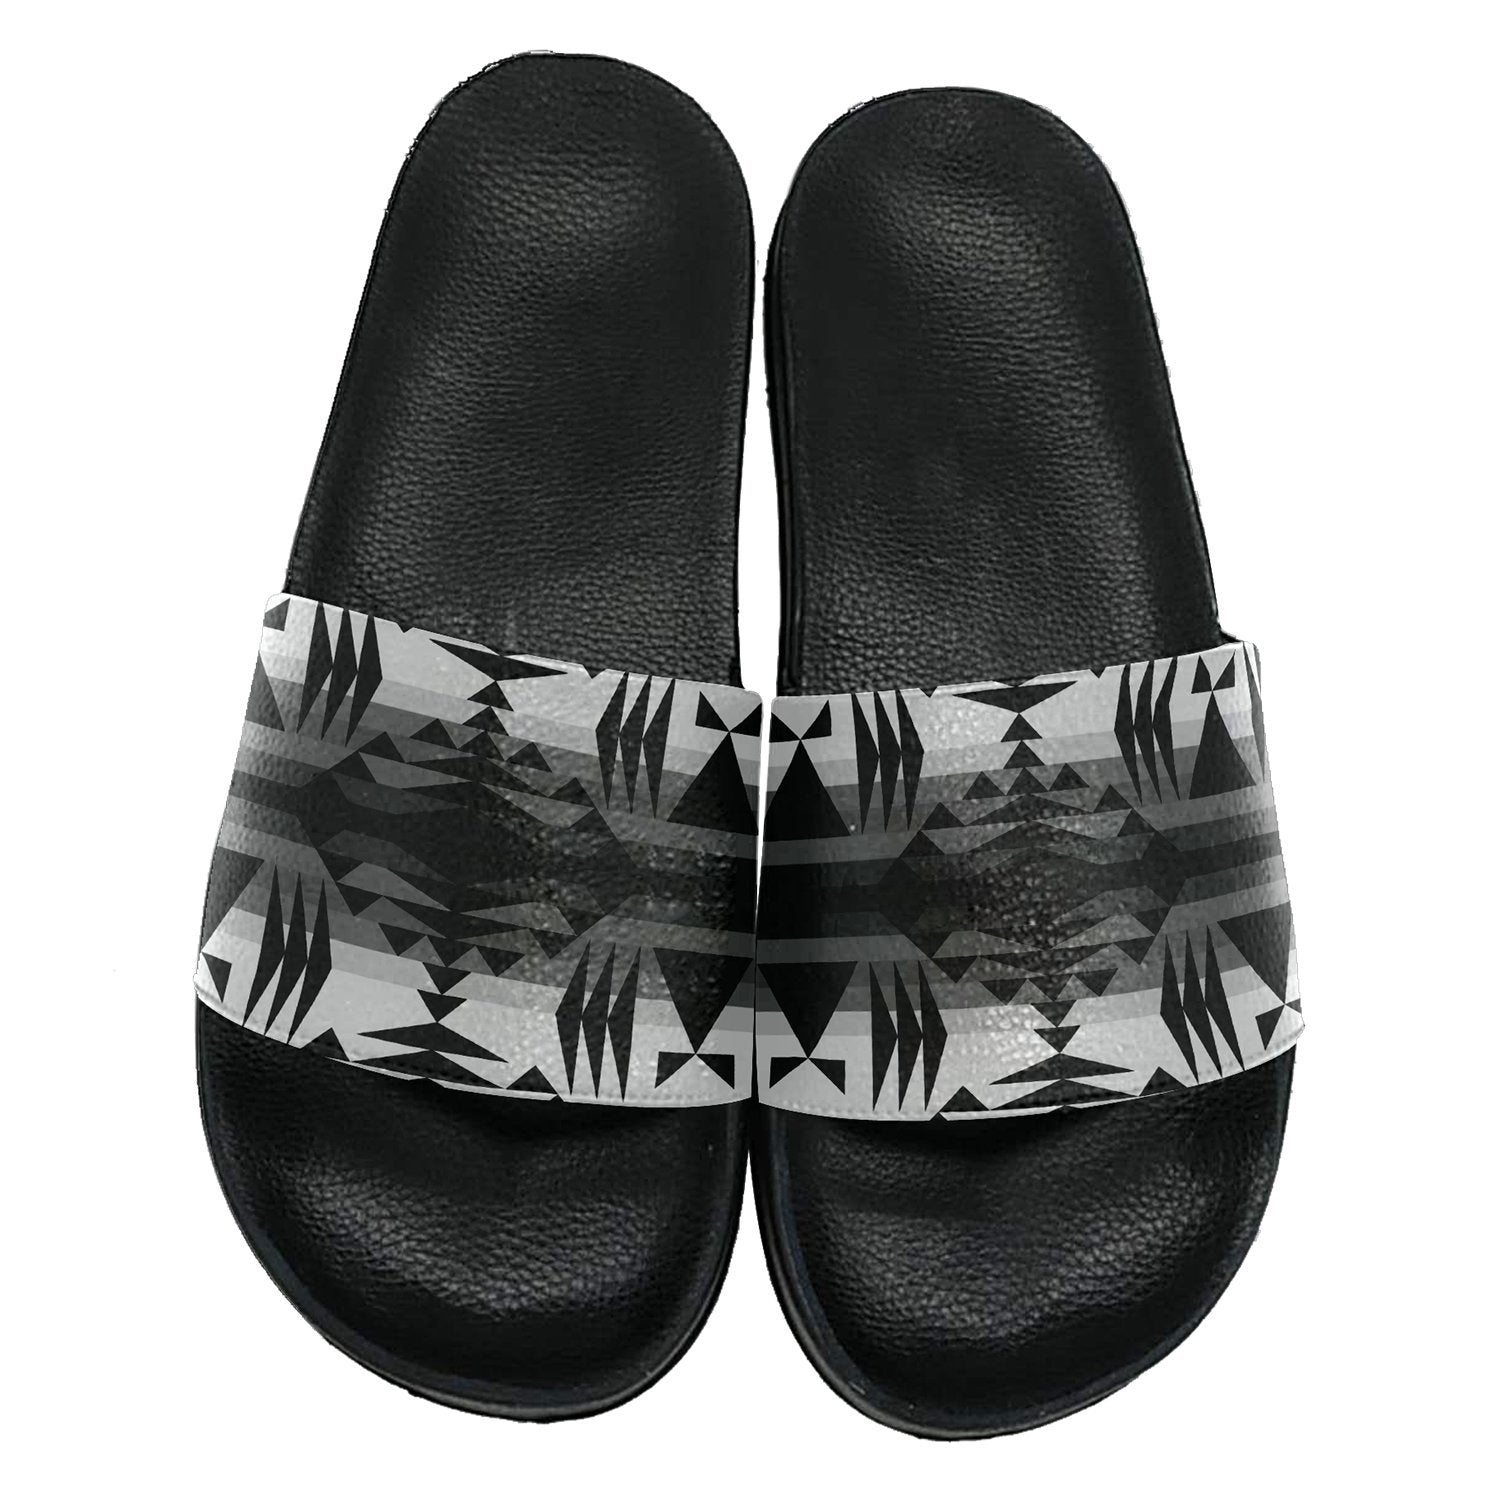 Between the Mountains White and Black Slide Sandals 49 Dzine 